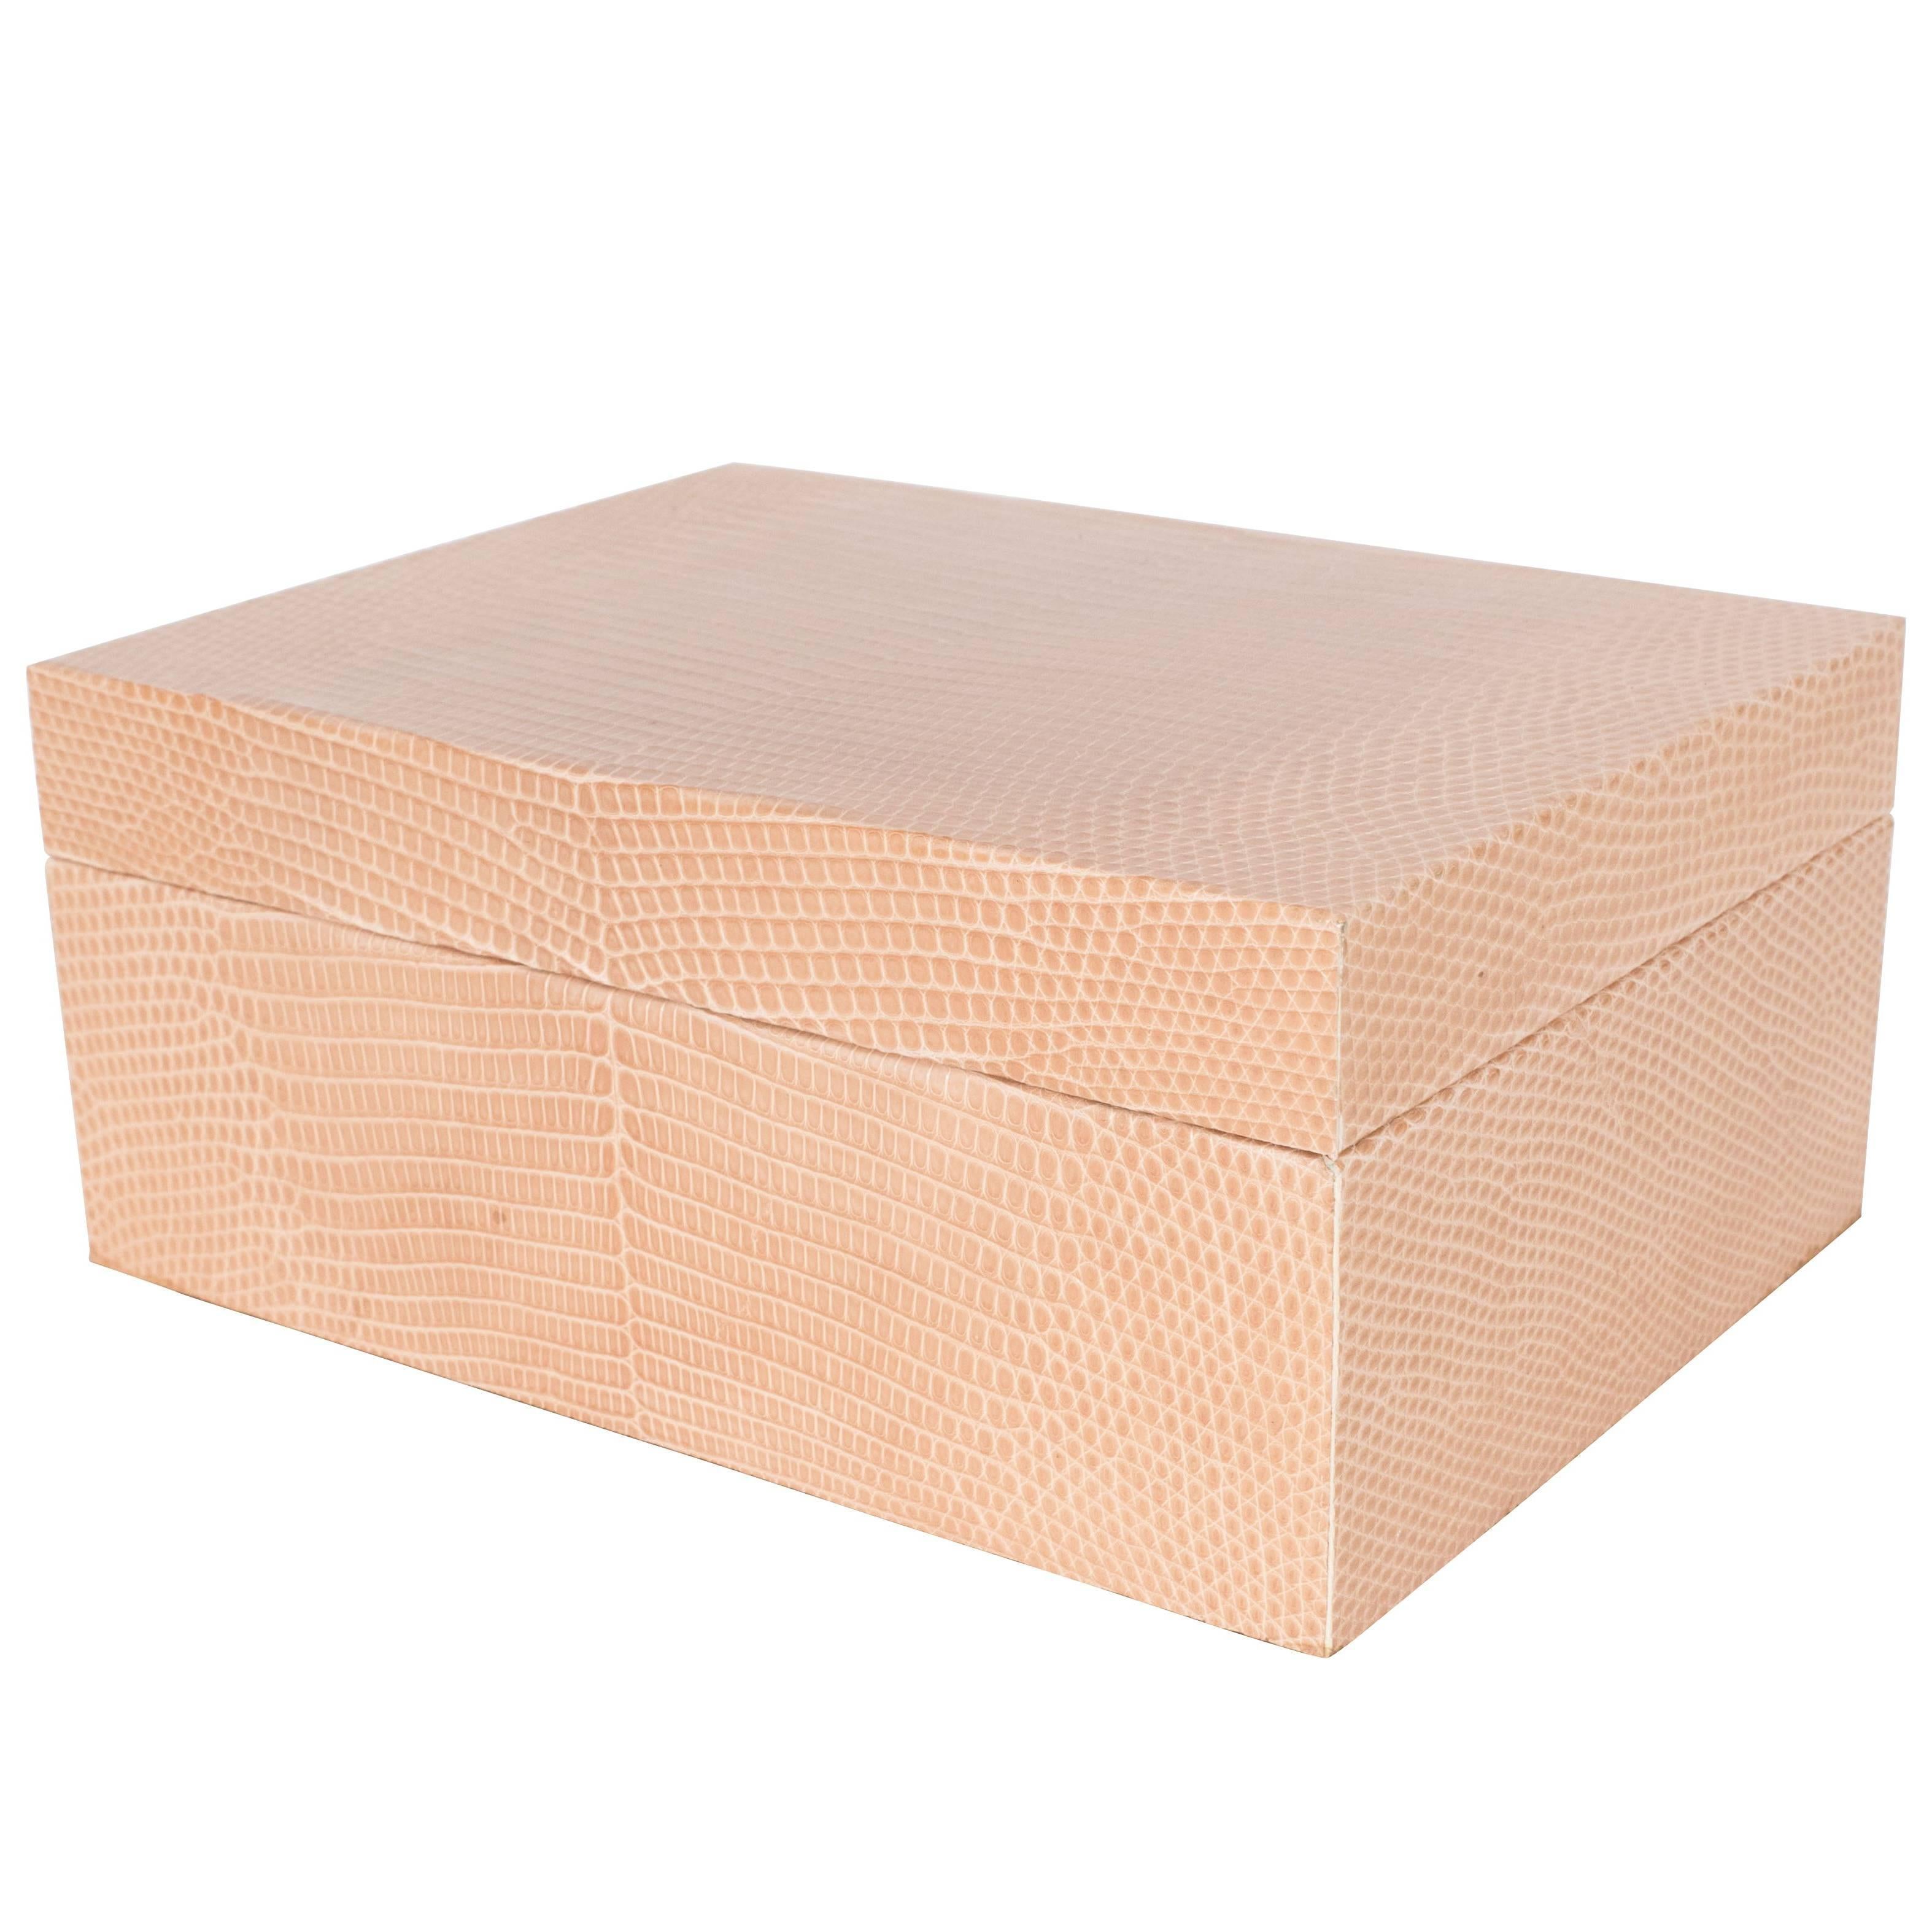 Chic Modernist Lizard Skin Wrapped Box in Natural Tones